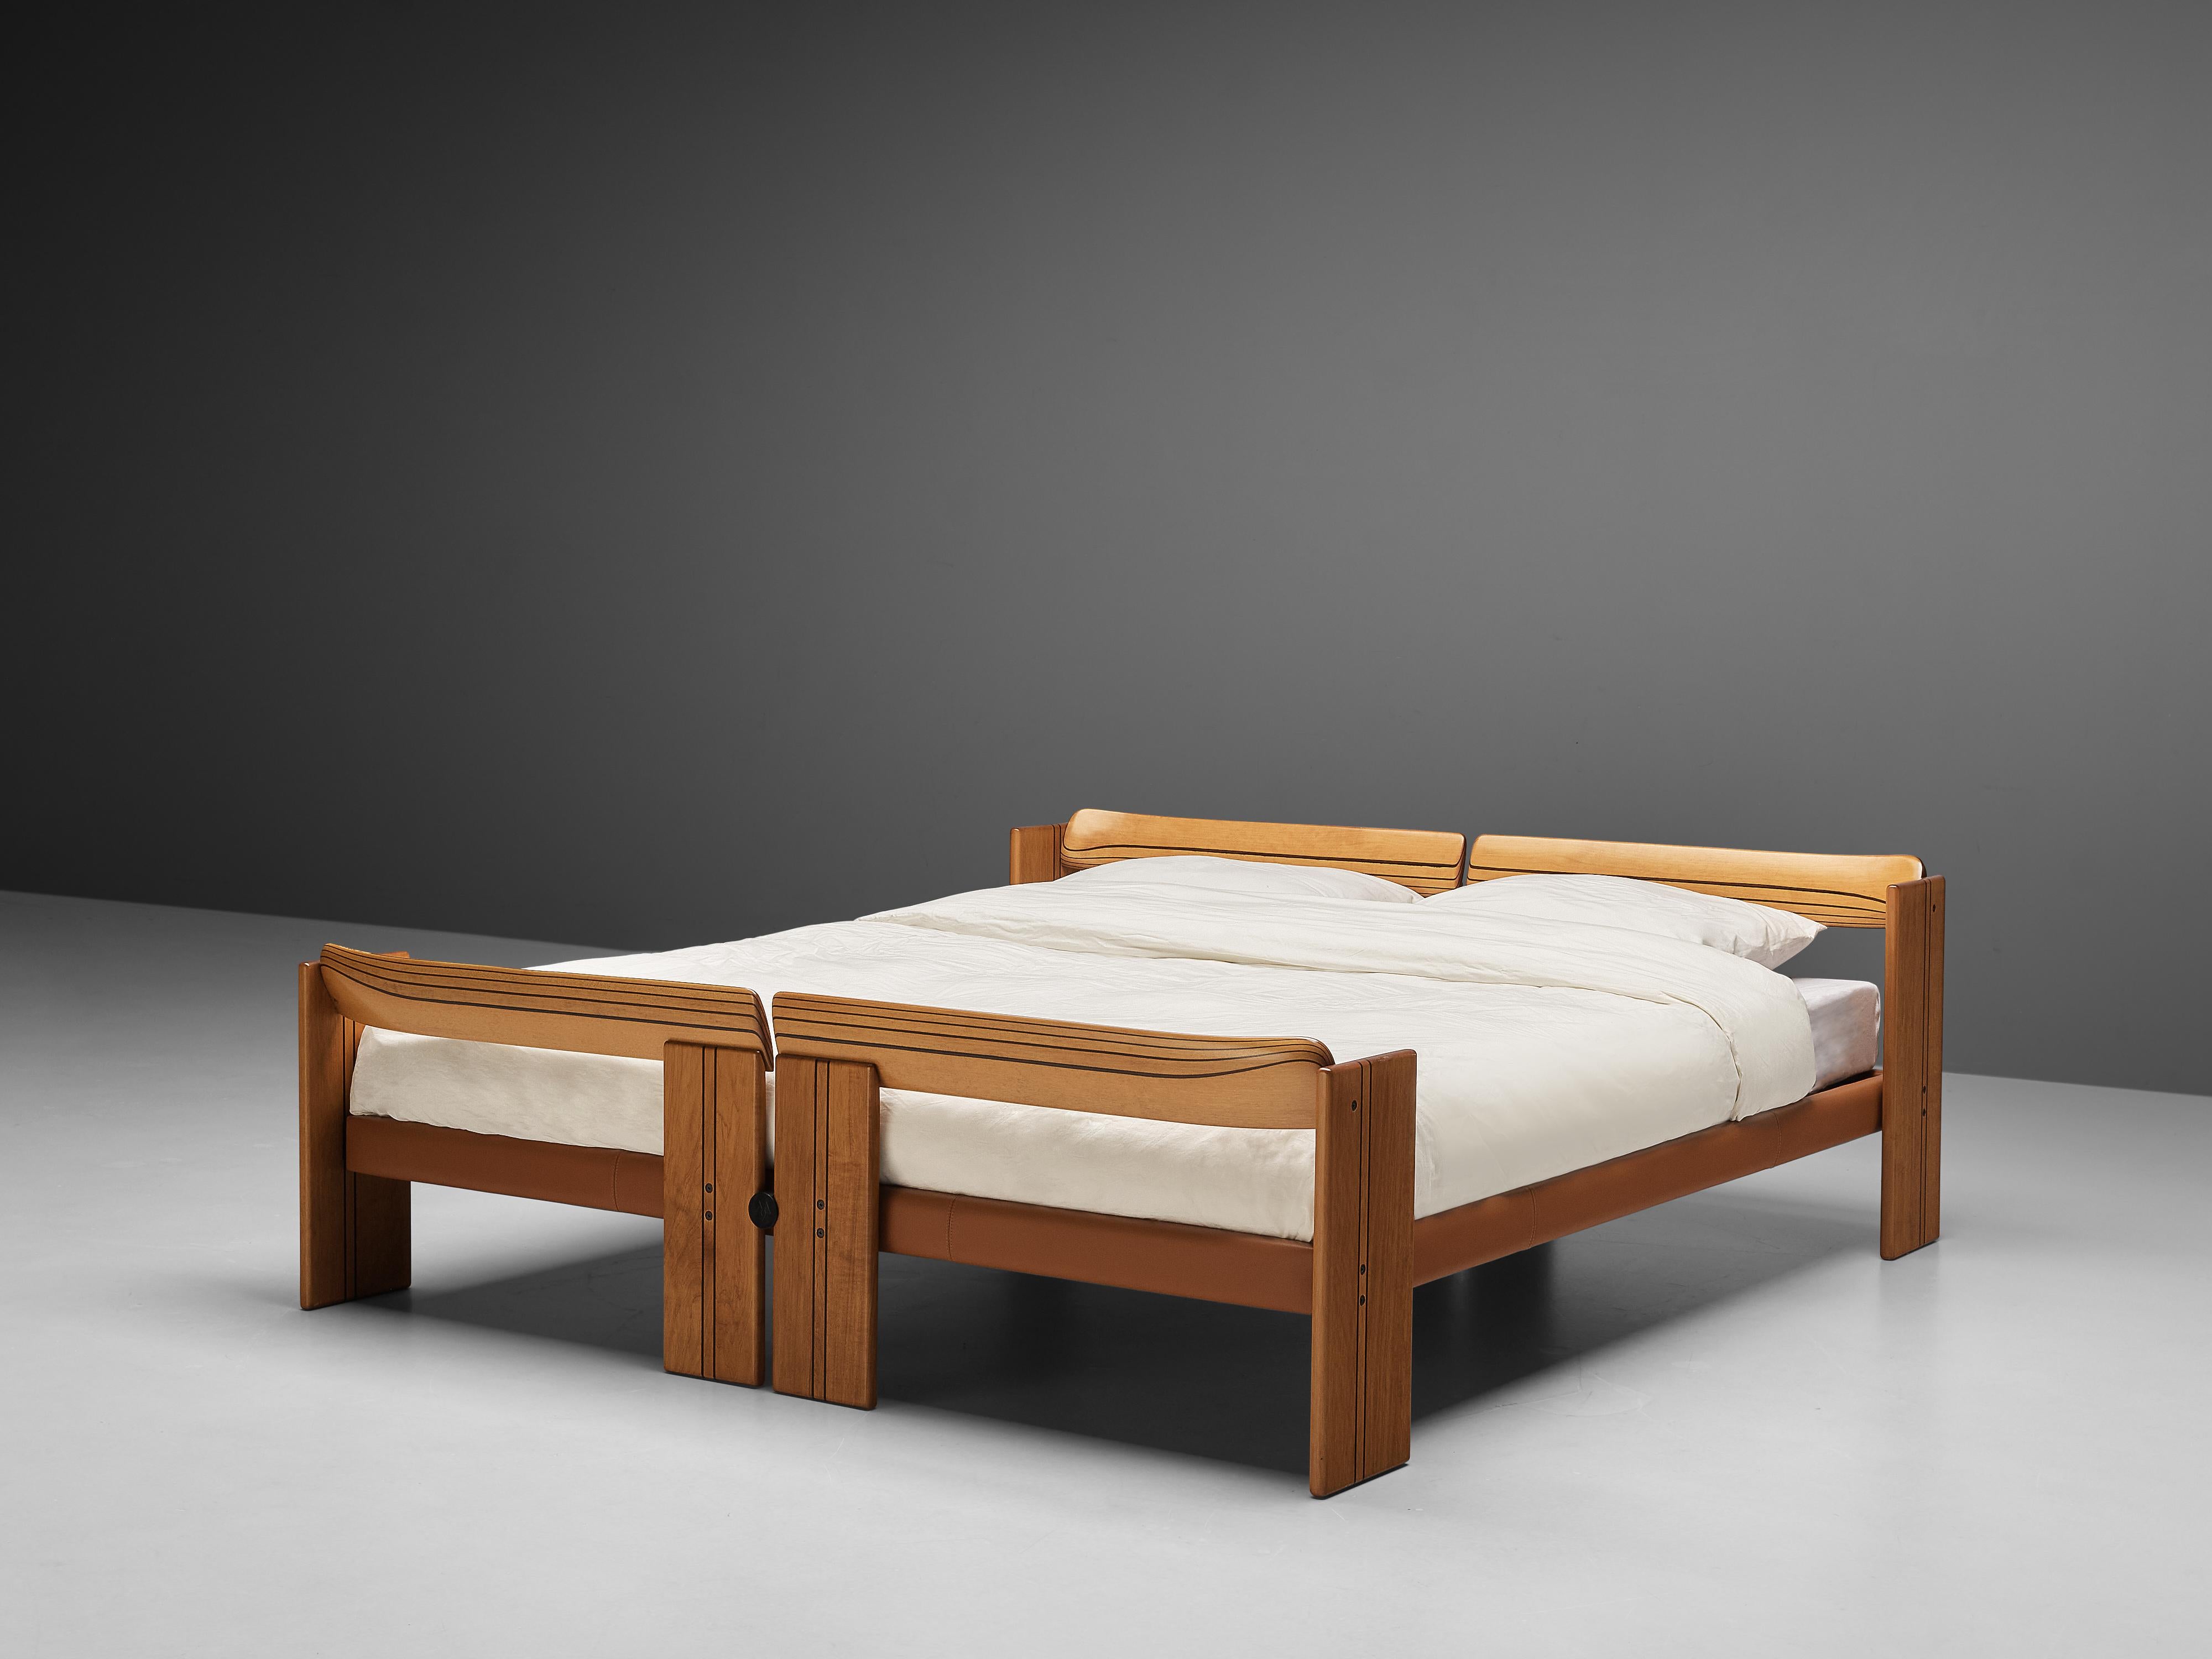 Afra & Tobia Scarpa, 'Artona' bed, walnut, leather, Italy, 1975

The 'Artona' line by the Scarpa duo was in fact the first line ever produced by Maxalto, the specialist division of B&B Italia. Maxalto was originally set up in 1975 as a high-end